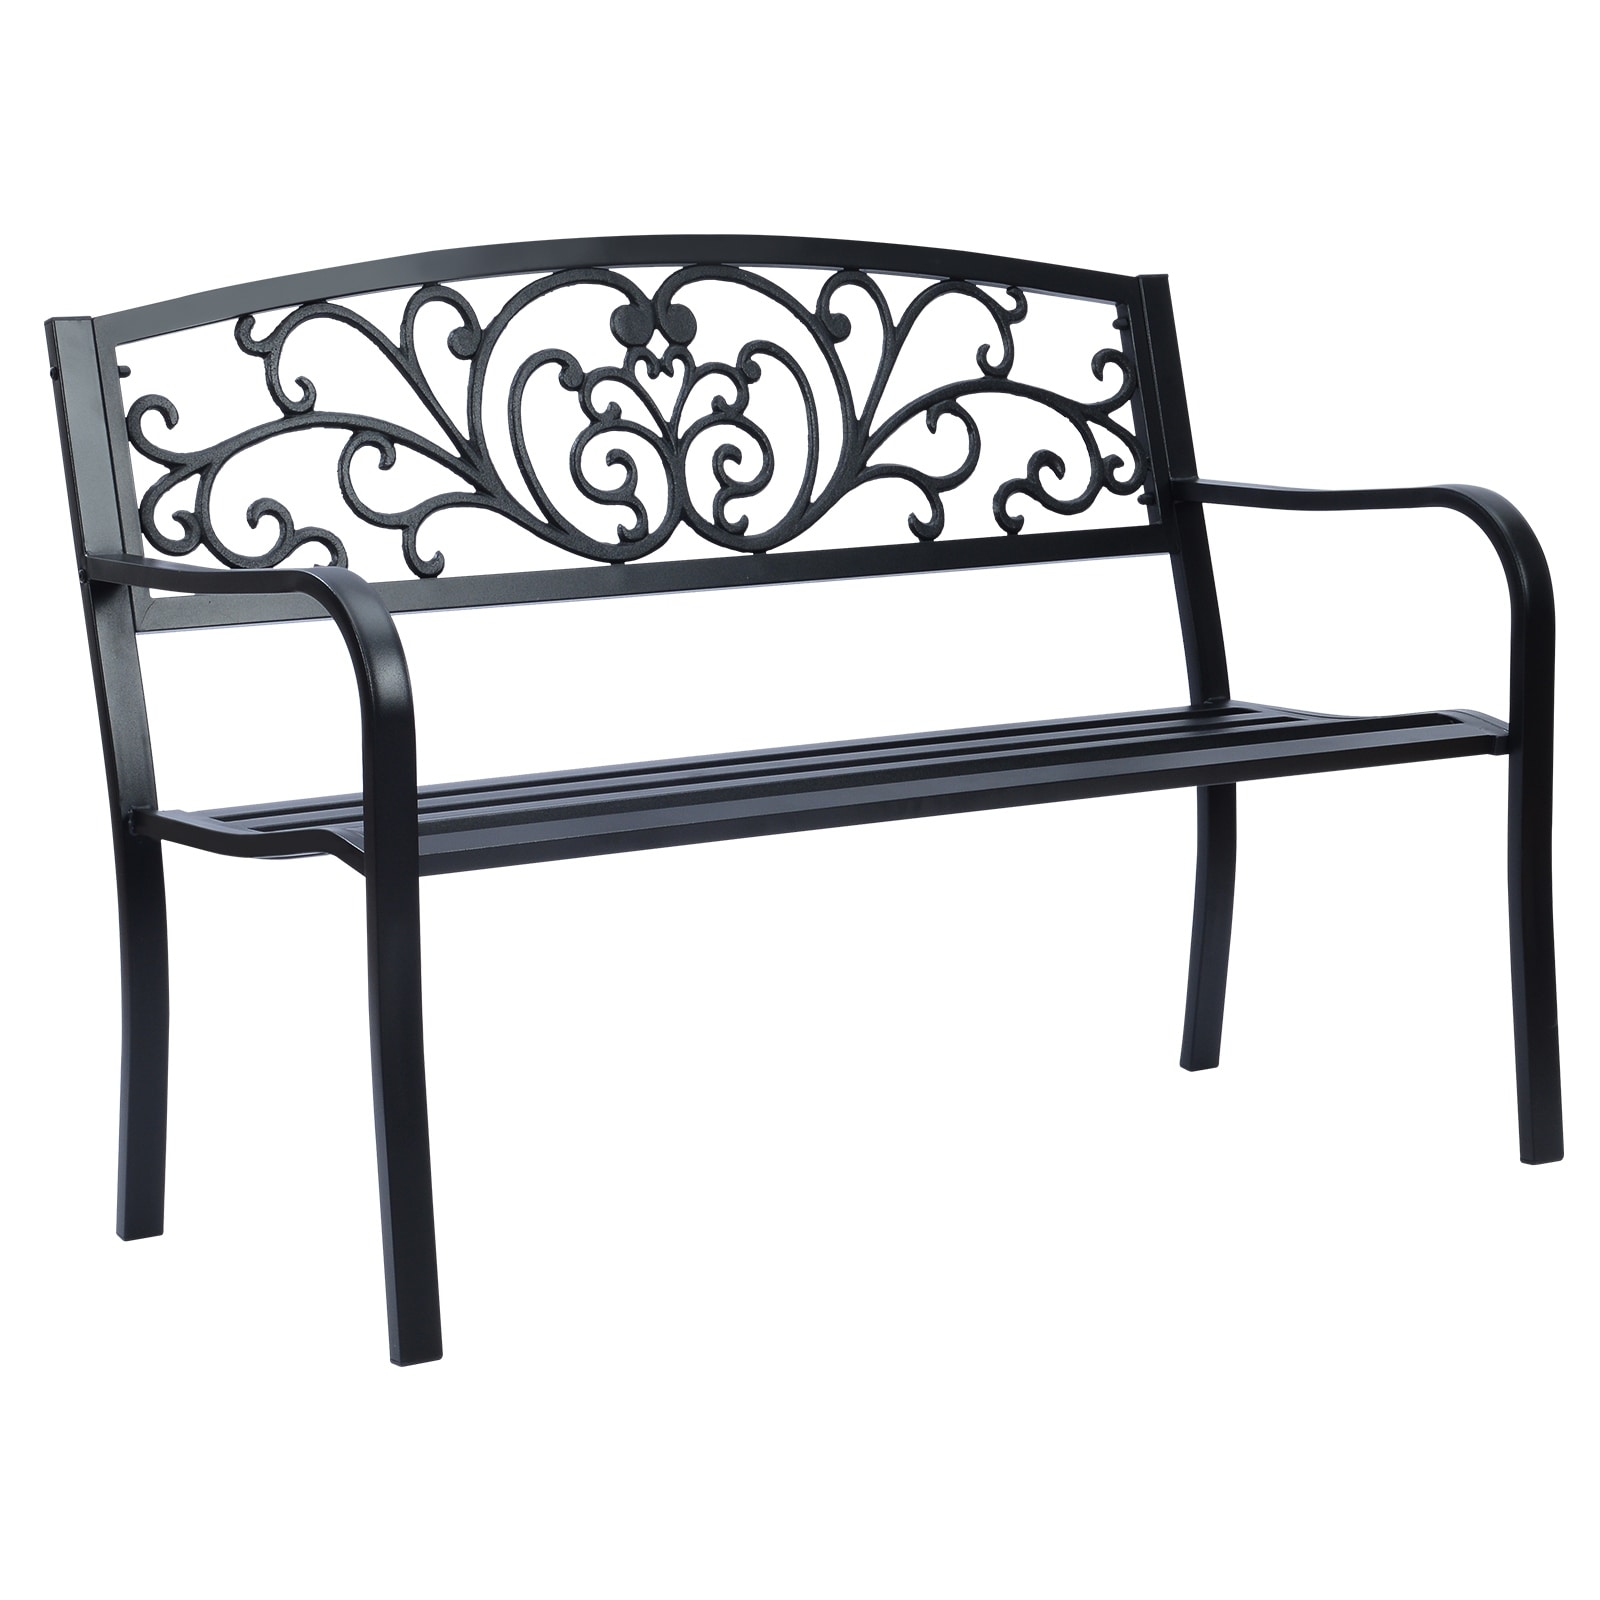 Simply Elegant Flora Metal Park Patio Bench, Outdoor Bench in Black for  Porch, Lawn, Garden, Deck by Sun-Ray - N/A - On Sale - Bed Bath & Beyond -  33564340